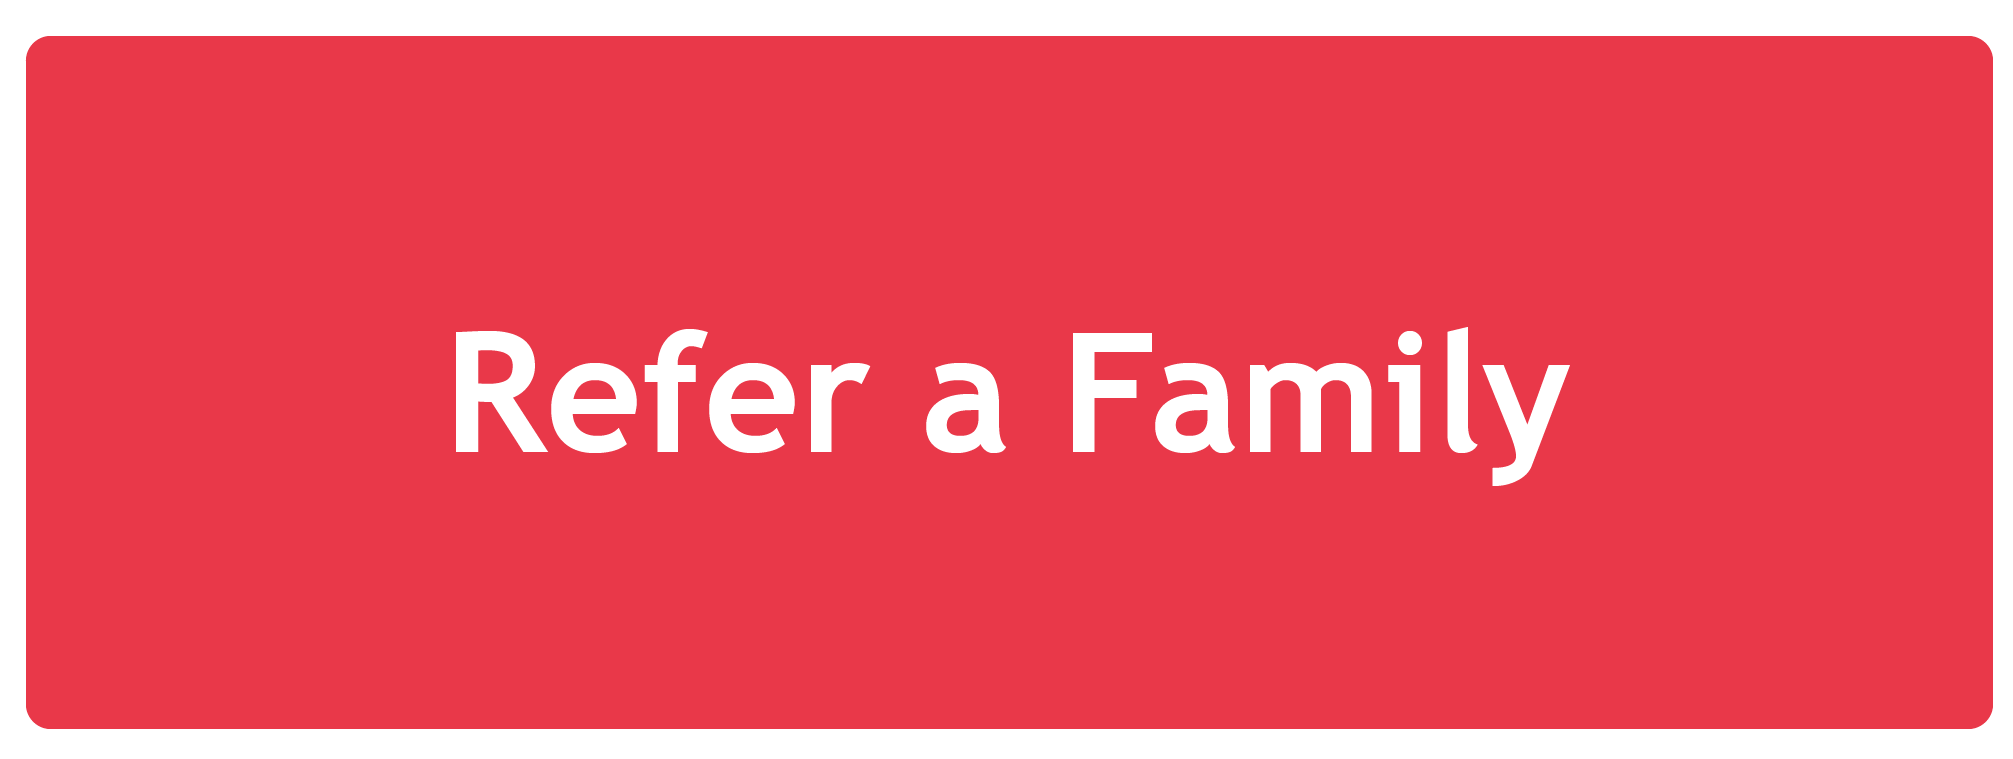 Click here: Refer a Family